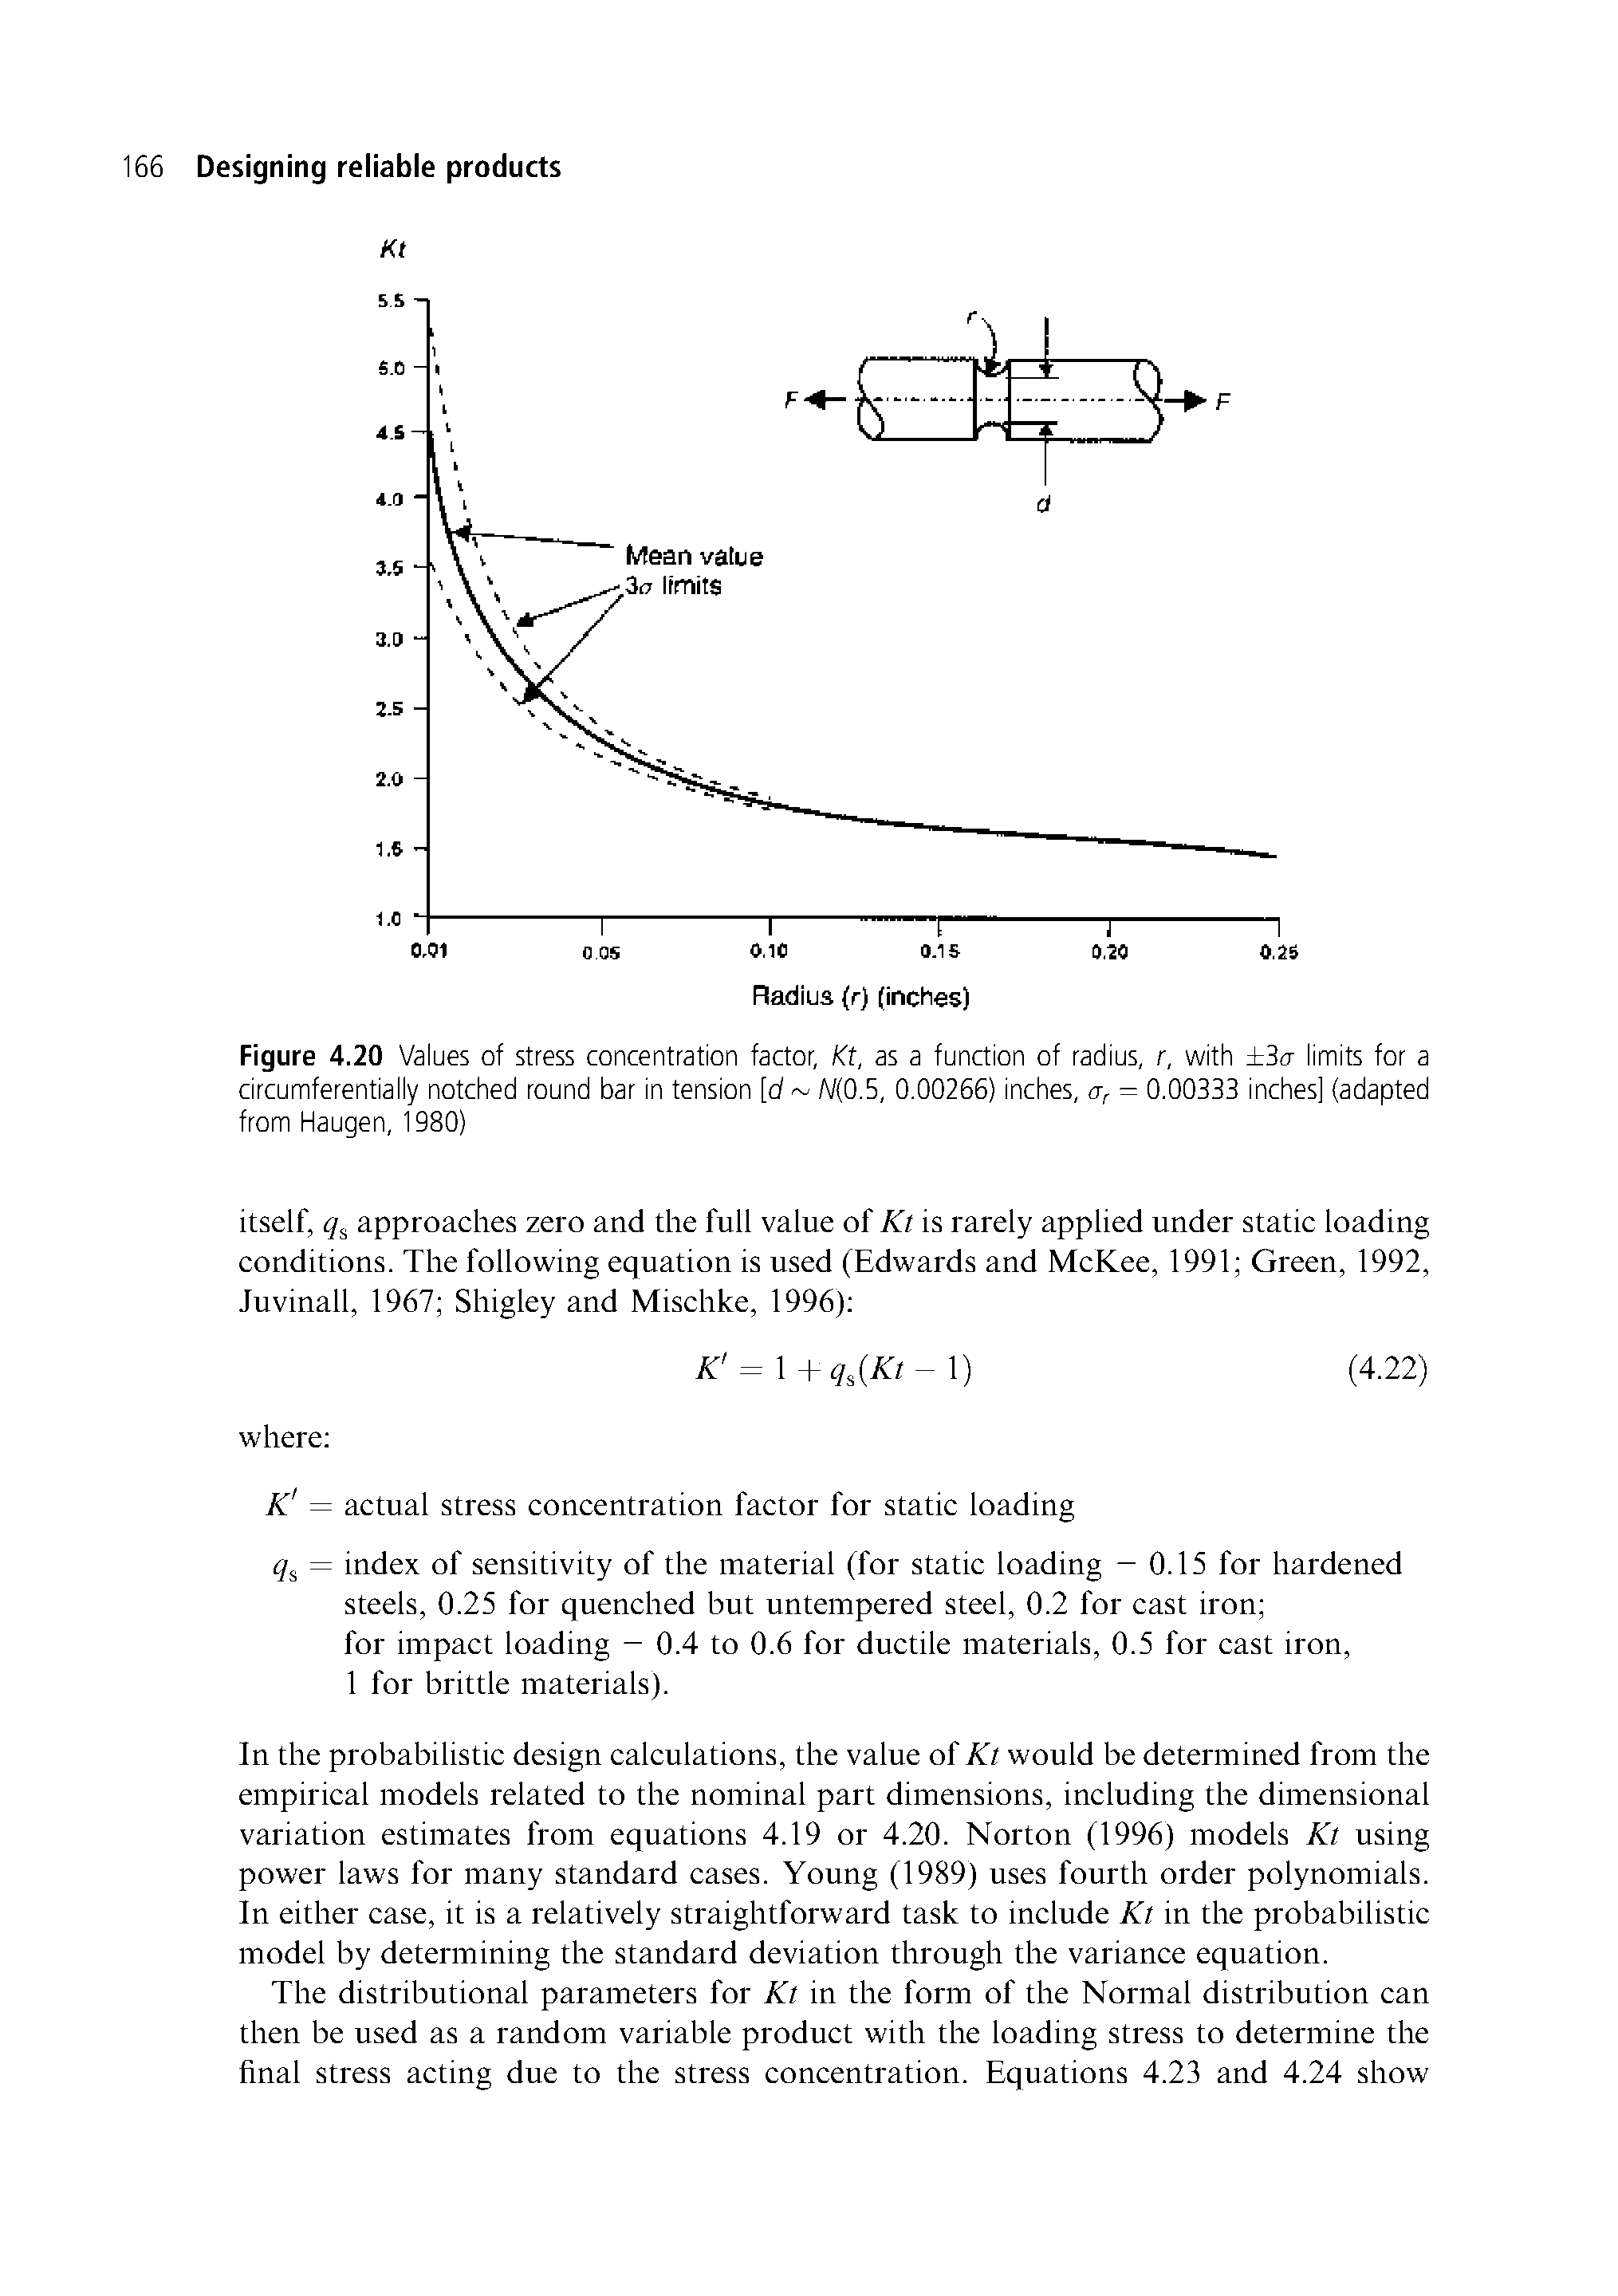 Figure 4.20 Values of stress concentration factor, Kt, as a function of radius, r, with 3a limits for a circumferentially notched round bar in tension [d A/(0.5, 0.00266) inches, = 0.00333 inches] (adapted from Haugen, 1980)...